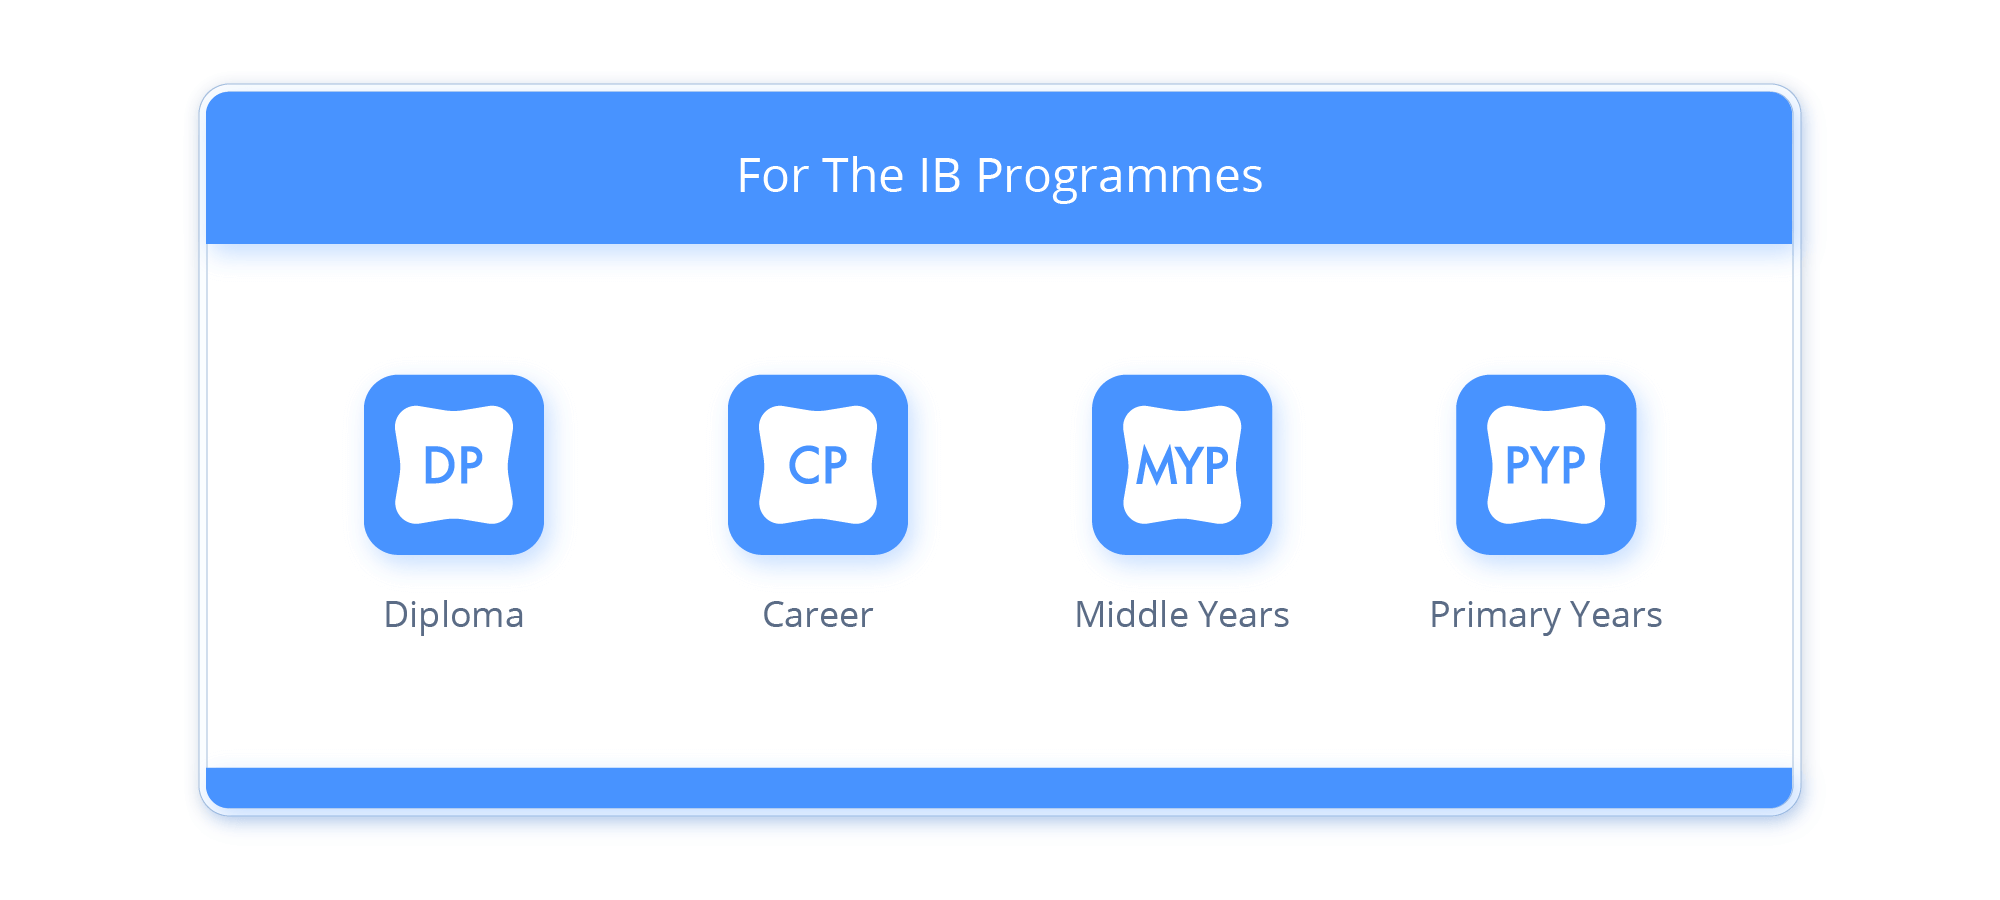 Supported IB Programmes from Primary Years to Diploma